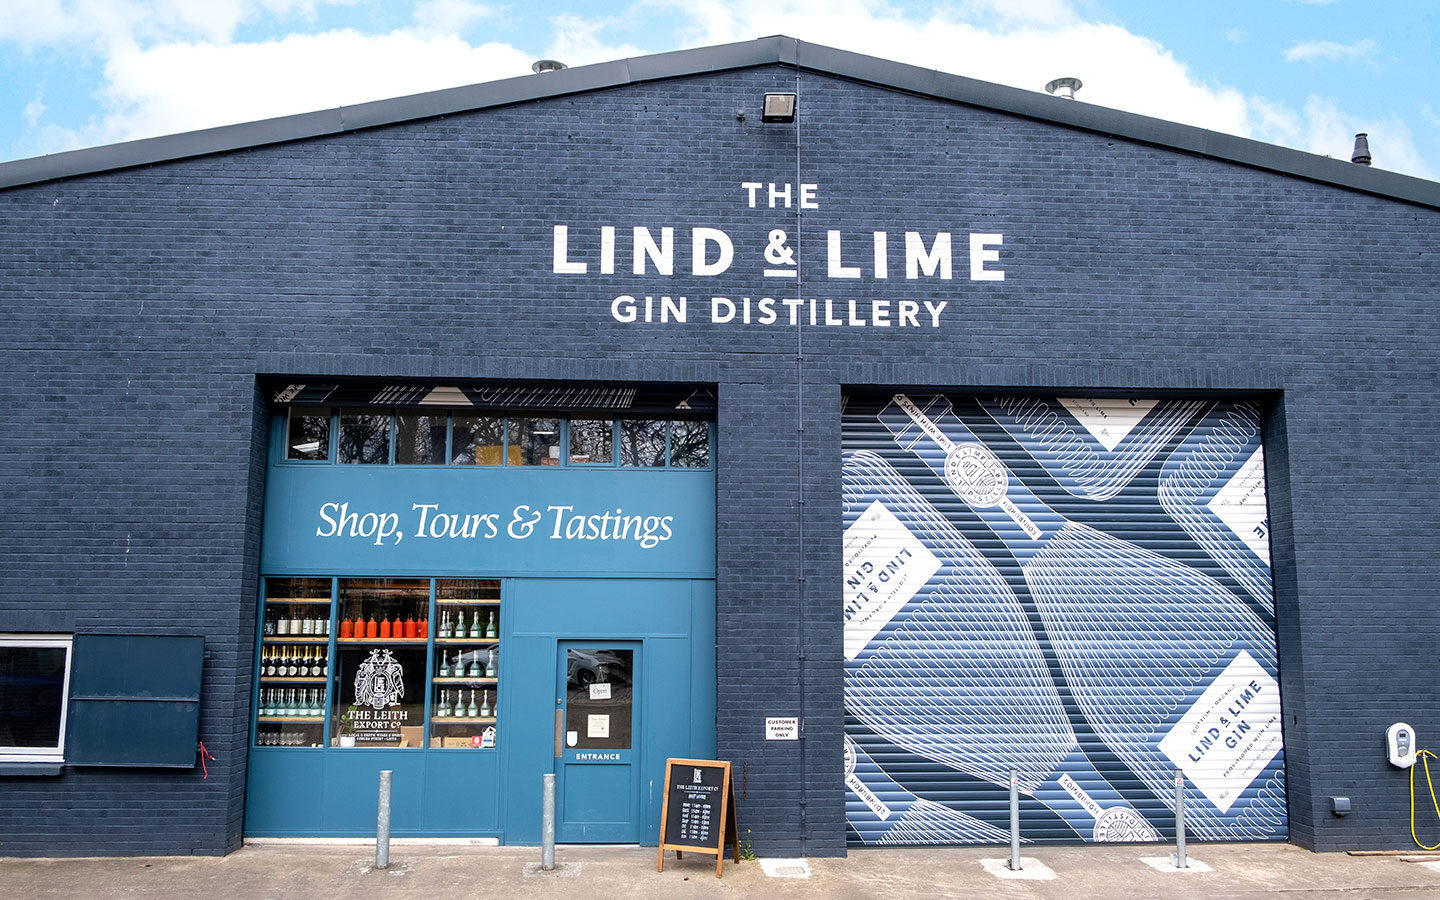 Entrance to the Lind and Lime gin distillery in Leith, Edinburgh